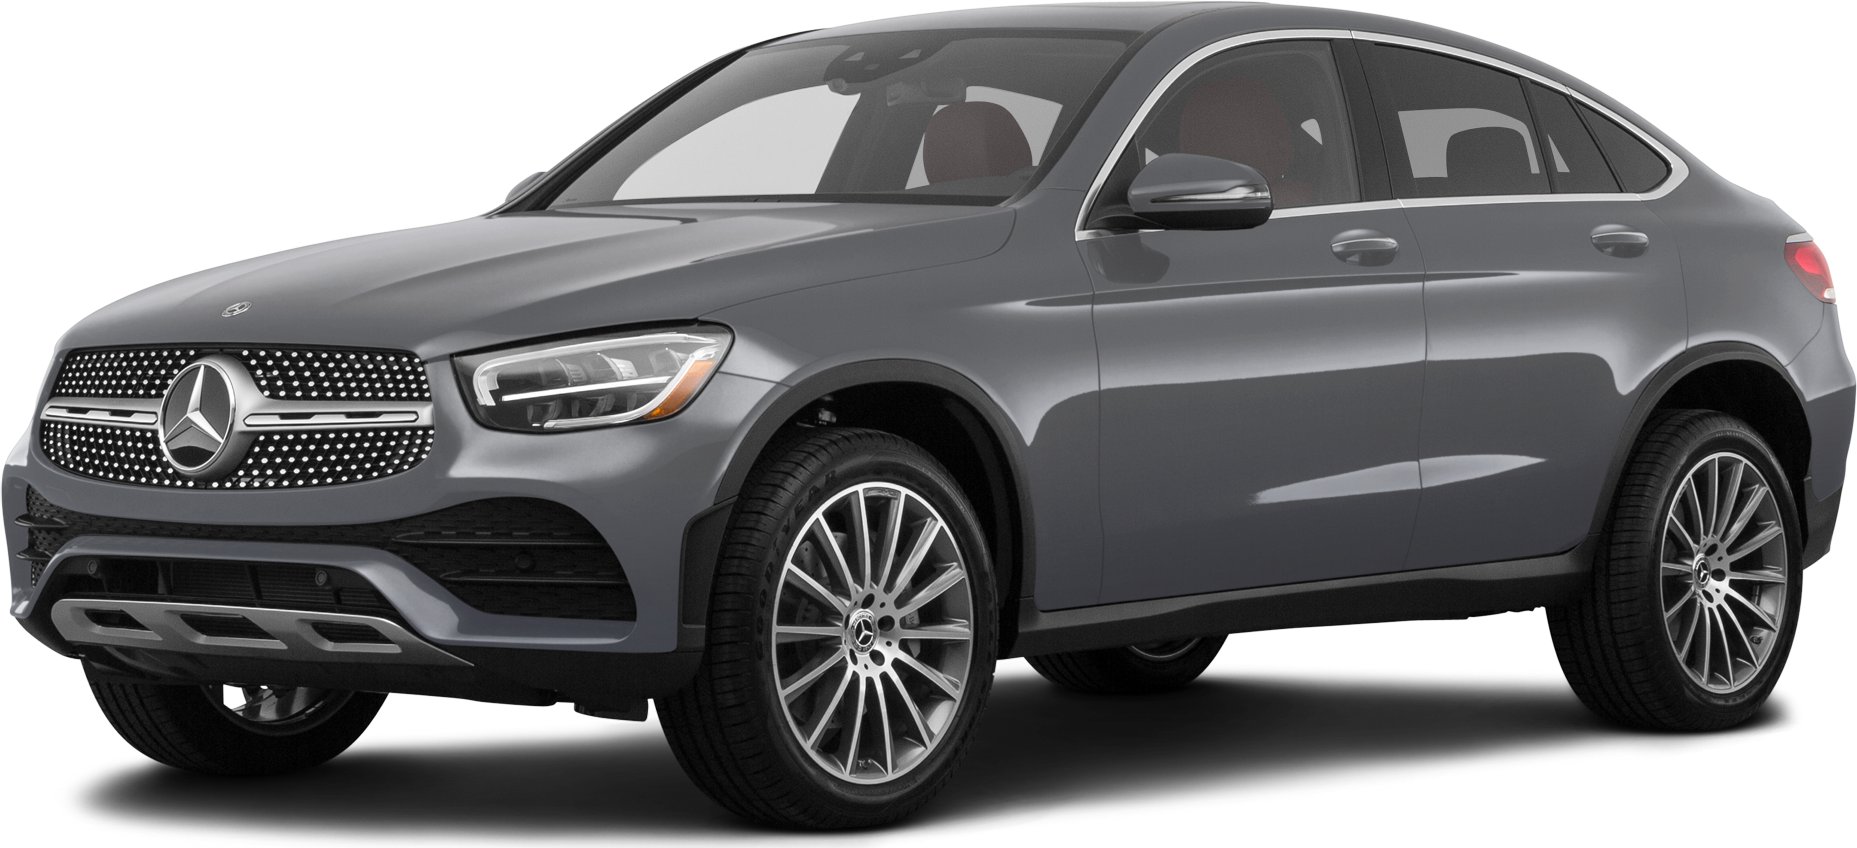 Mercedes Benz Glc Coupe Reviews Pricing Specs Kelley Blue Book